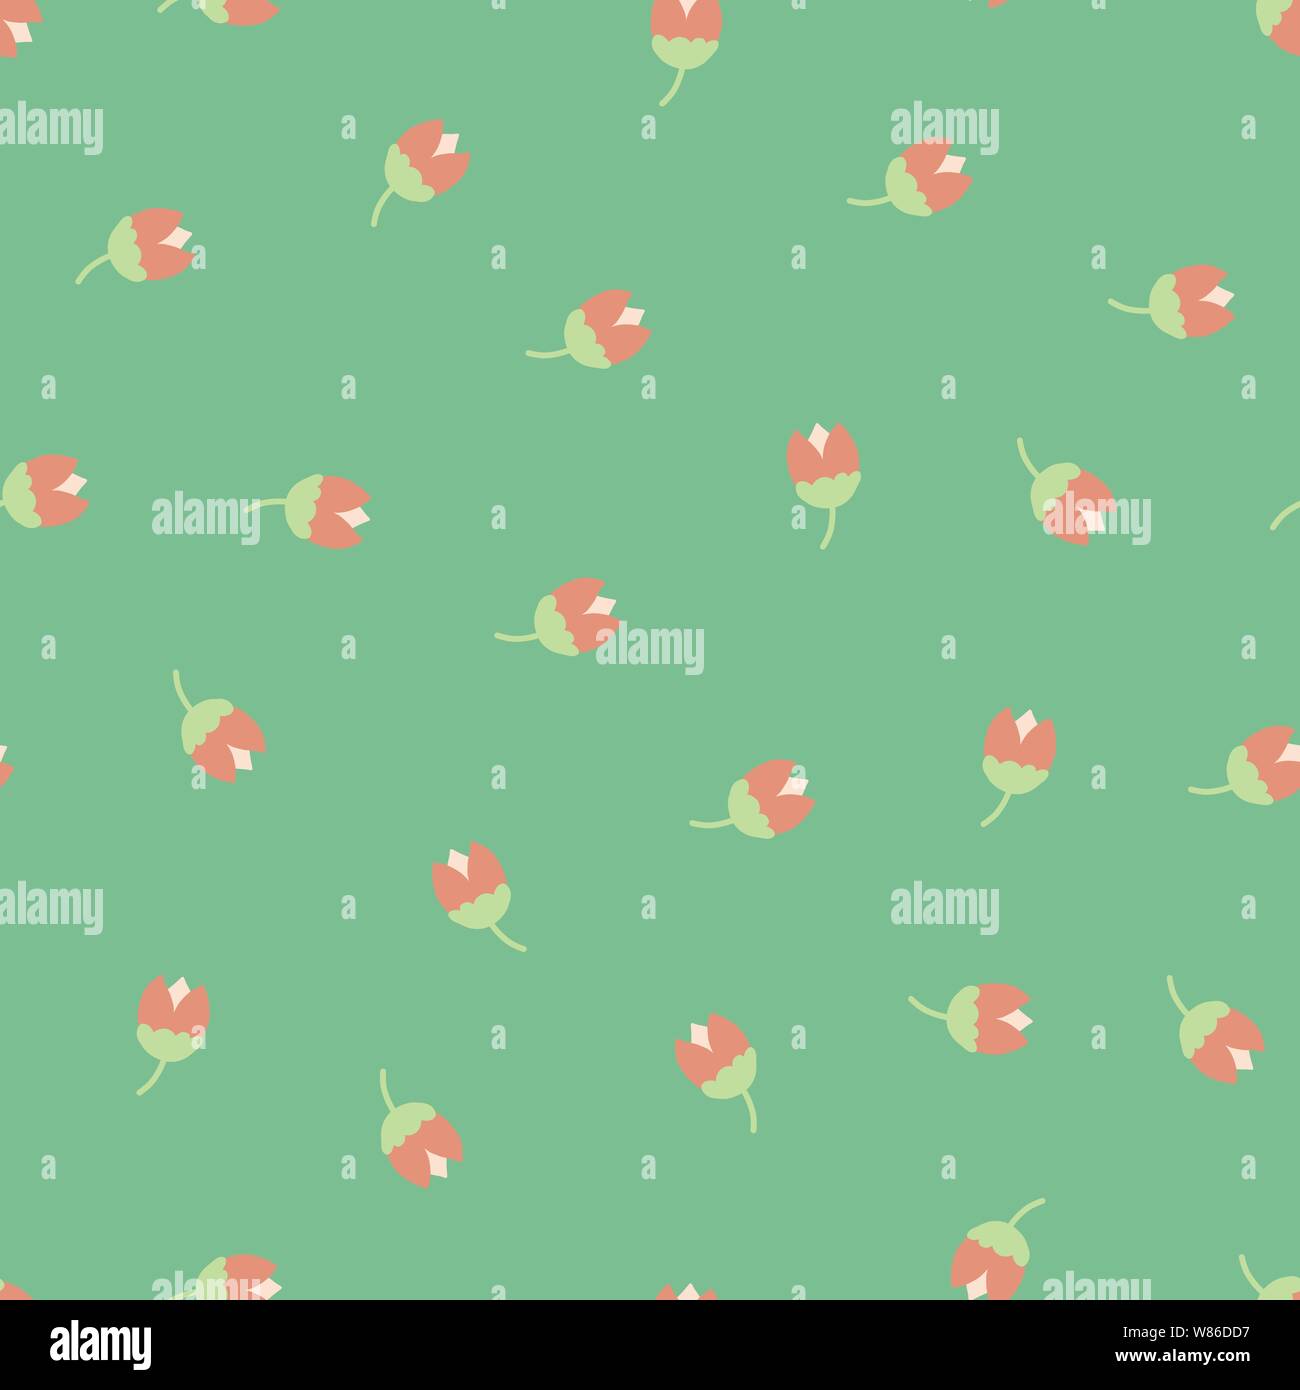 Scattered ditsy flowers green pink seamless vector pattern. Small folk florals repeating background. Scandinavian tulips. Fabric, girls, nursery, page Stock Vector